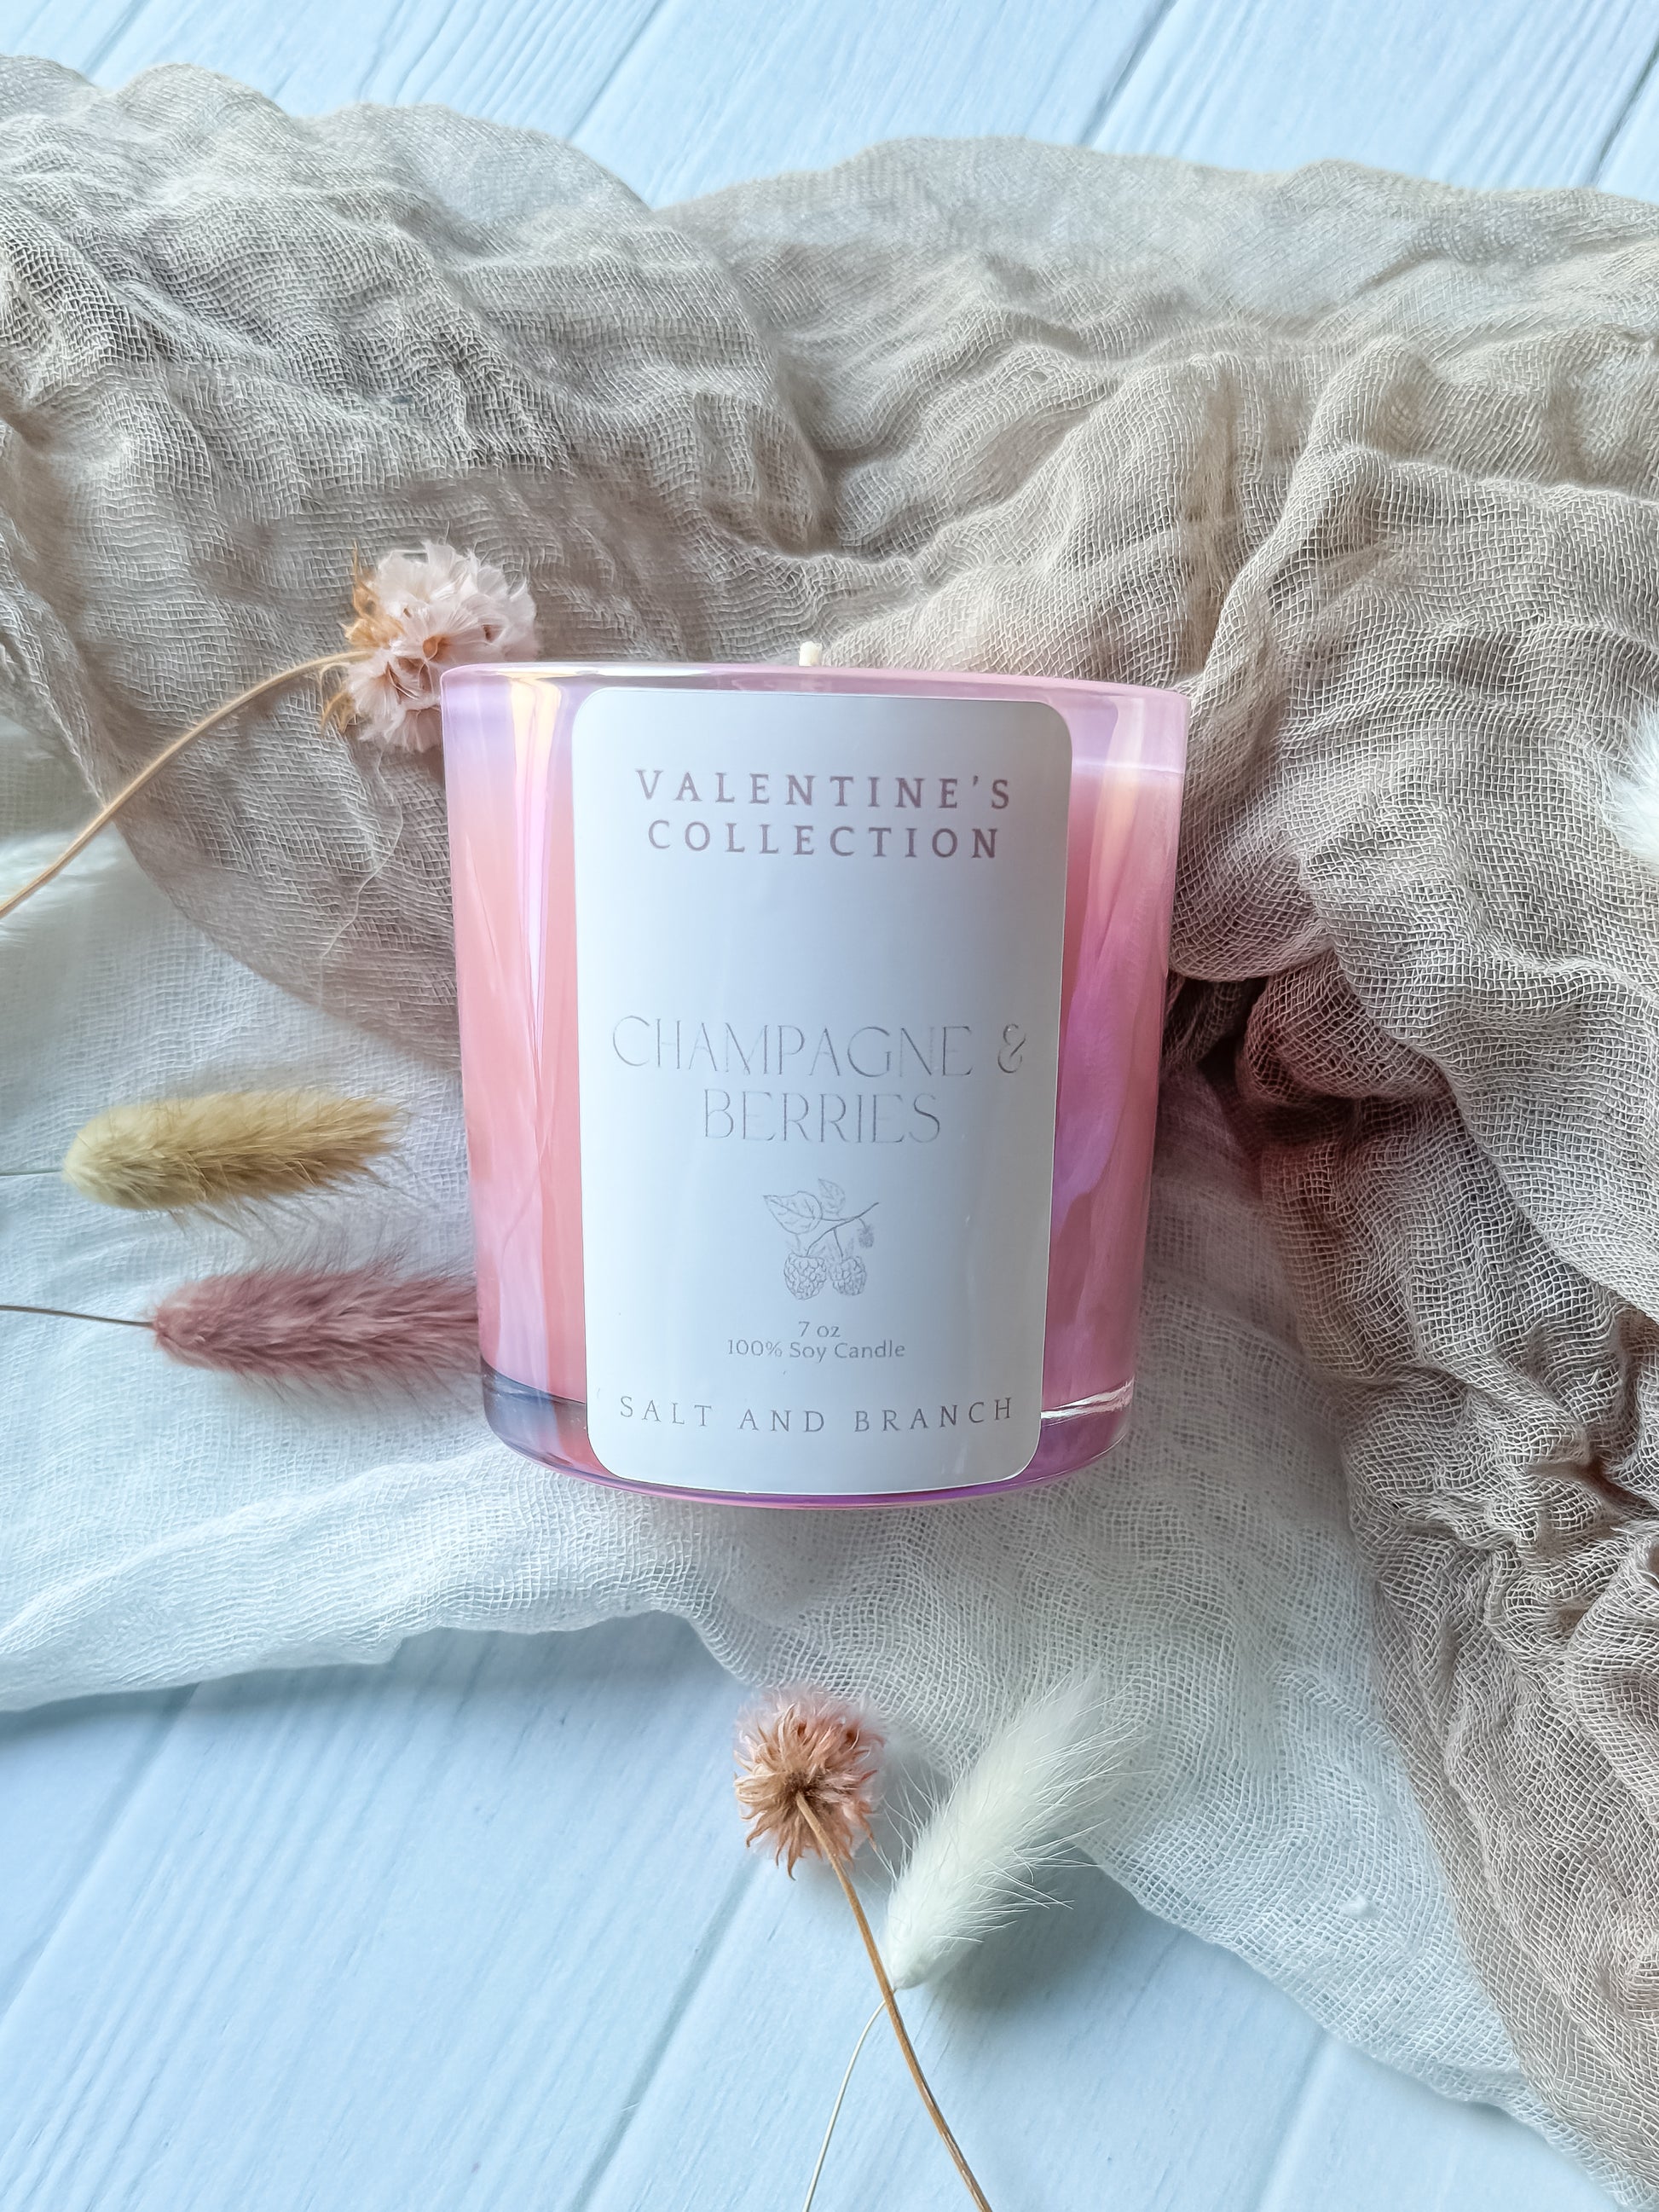 Champagne & Berries Soy Candle - Salt and Branch